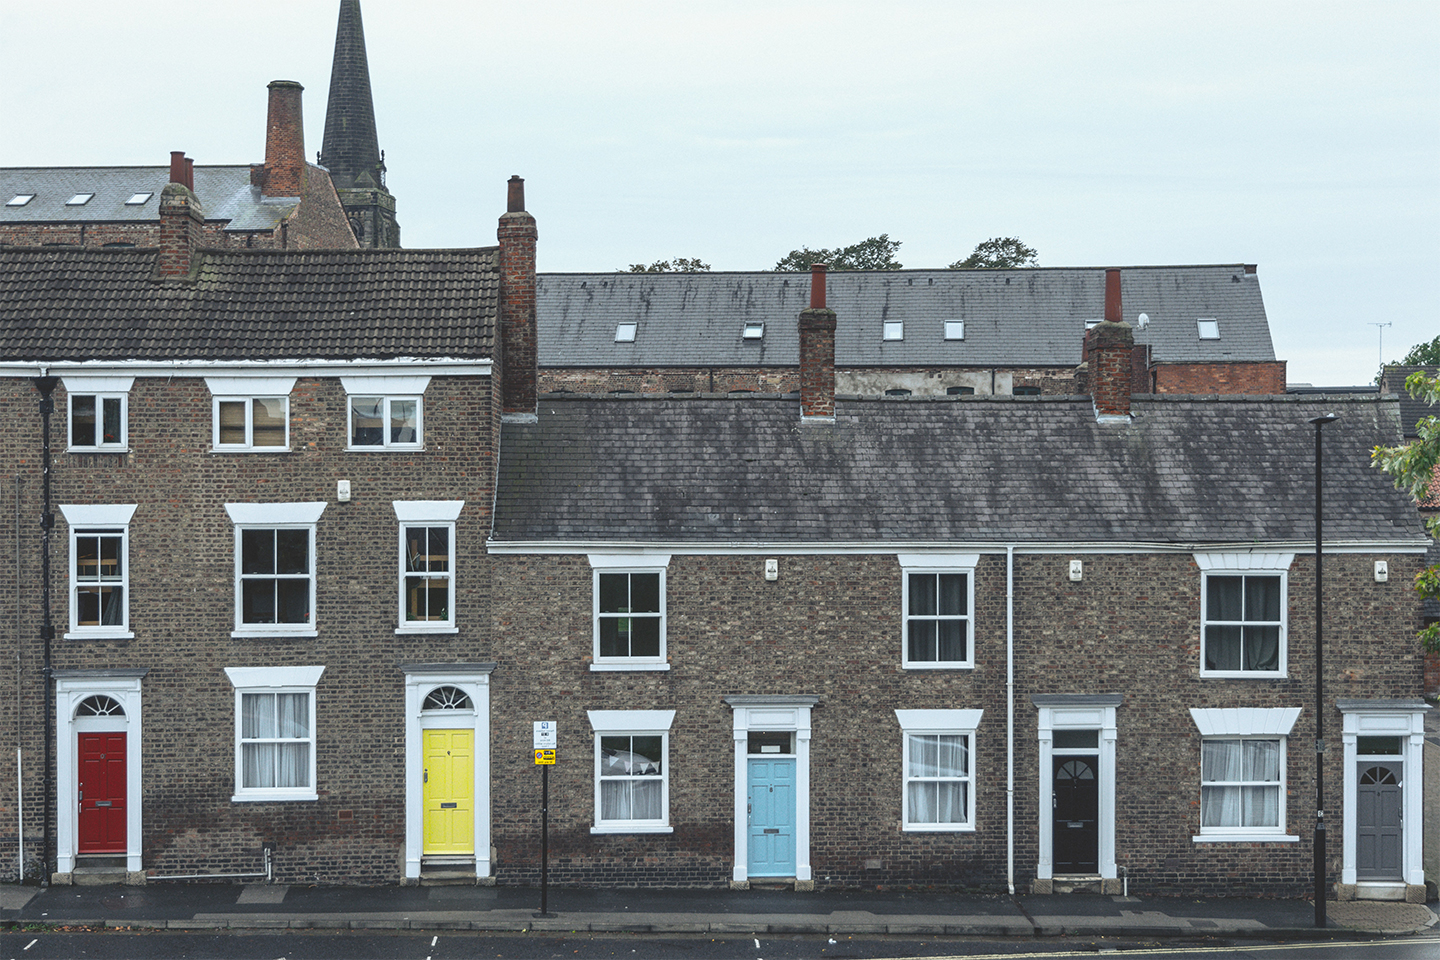 Georgian townhouses in the UK with colourful painted doors and a church spire in the background.Renters Reform Bill update —the future landscape of private renting  